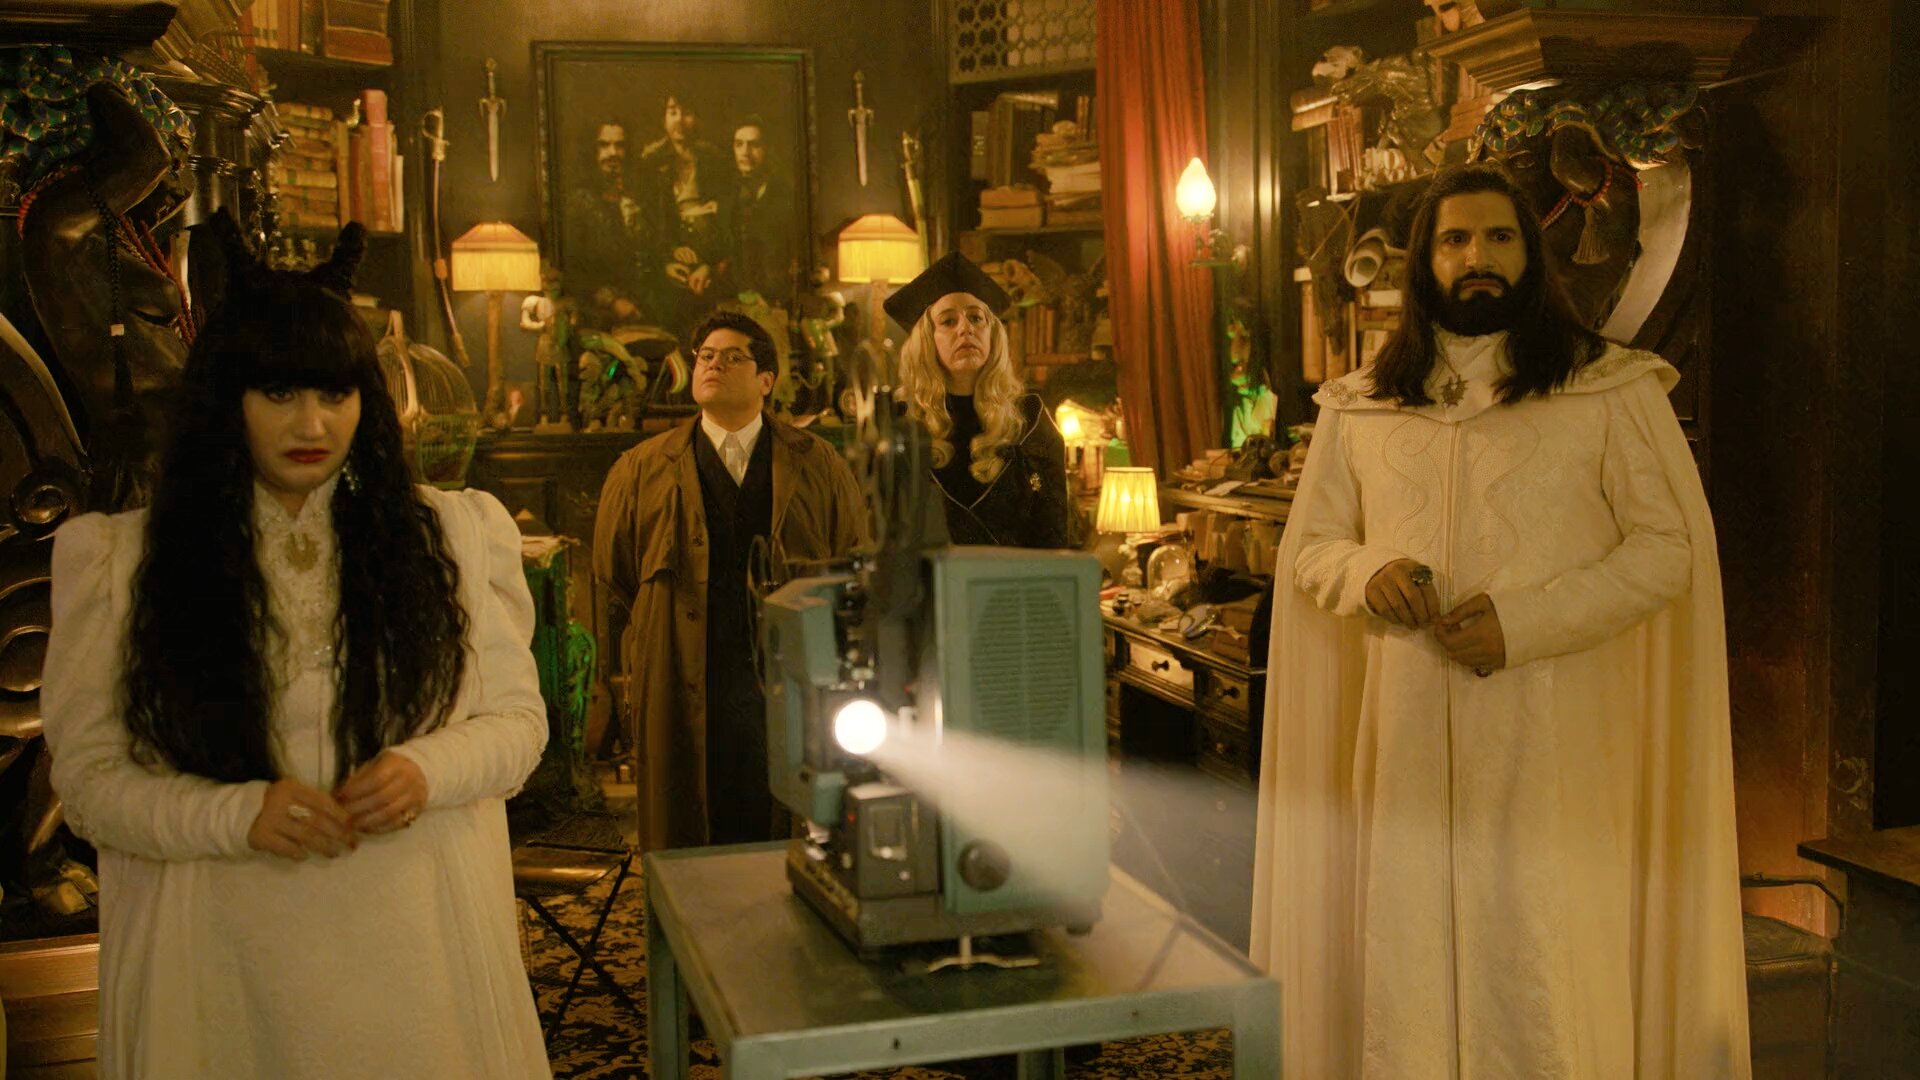 What We Do in the Shadows S3E5 The Chamber of Judgement